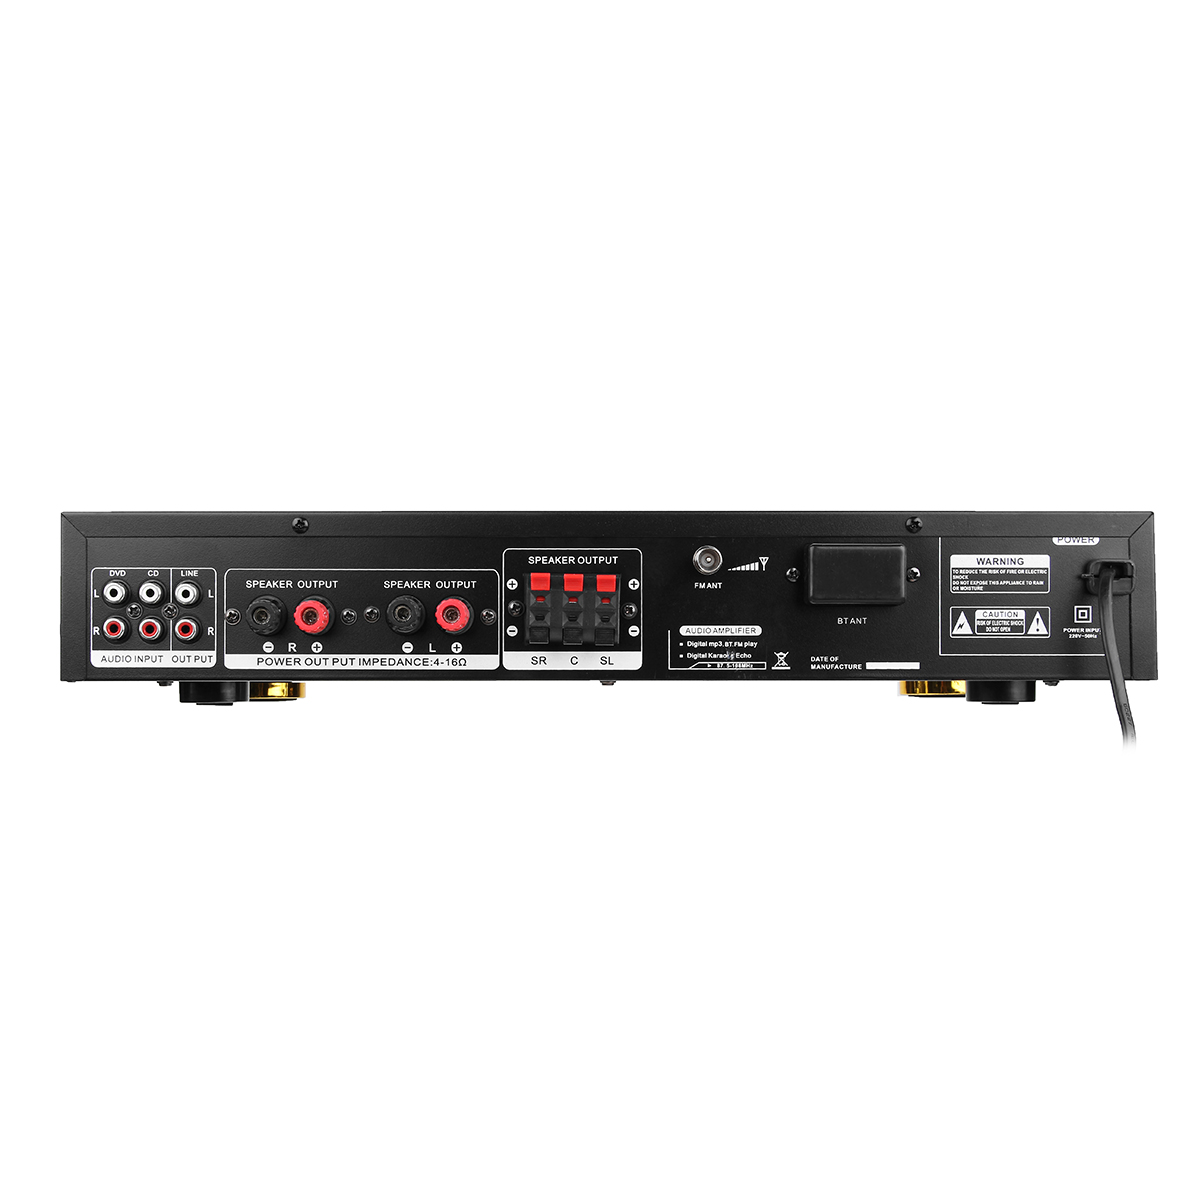 Find Sunbuck AV-628BT 1120W 5CH bluetooth 4ohm Stereo Surround Power Amplifier for Sale on Gipsybee.com with cryptocurrencies